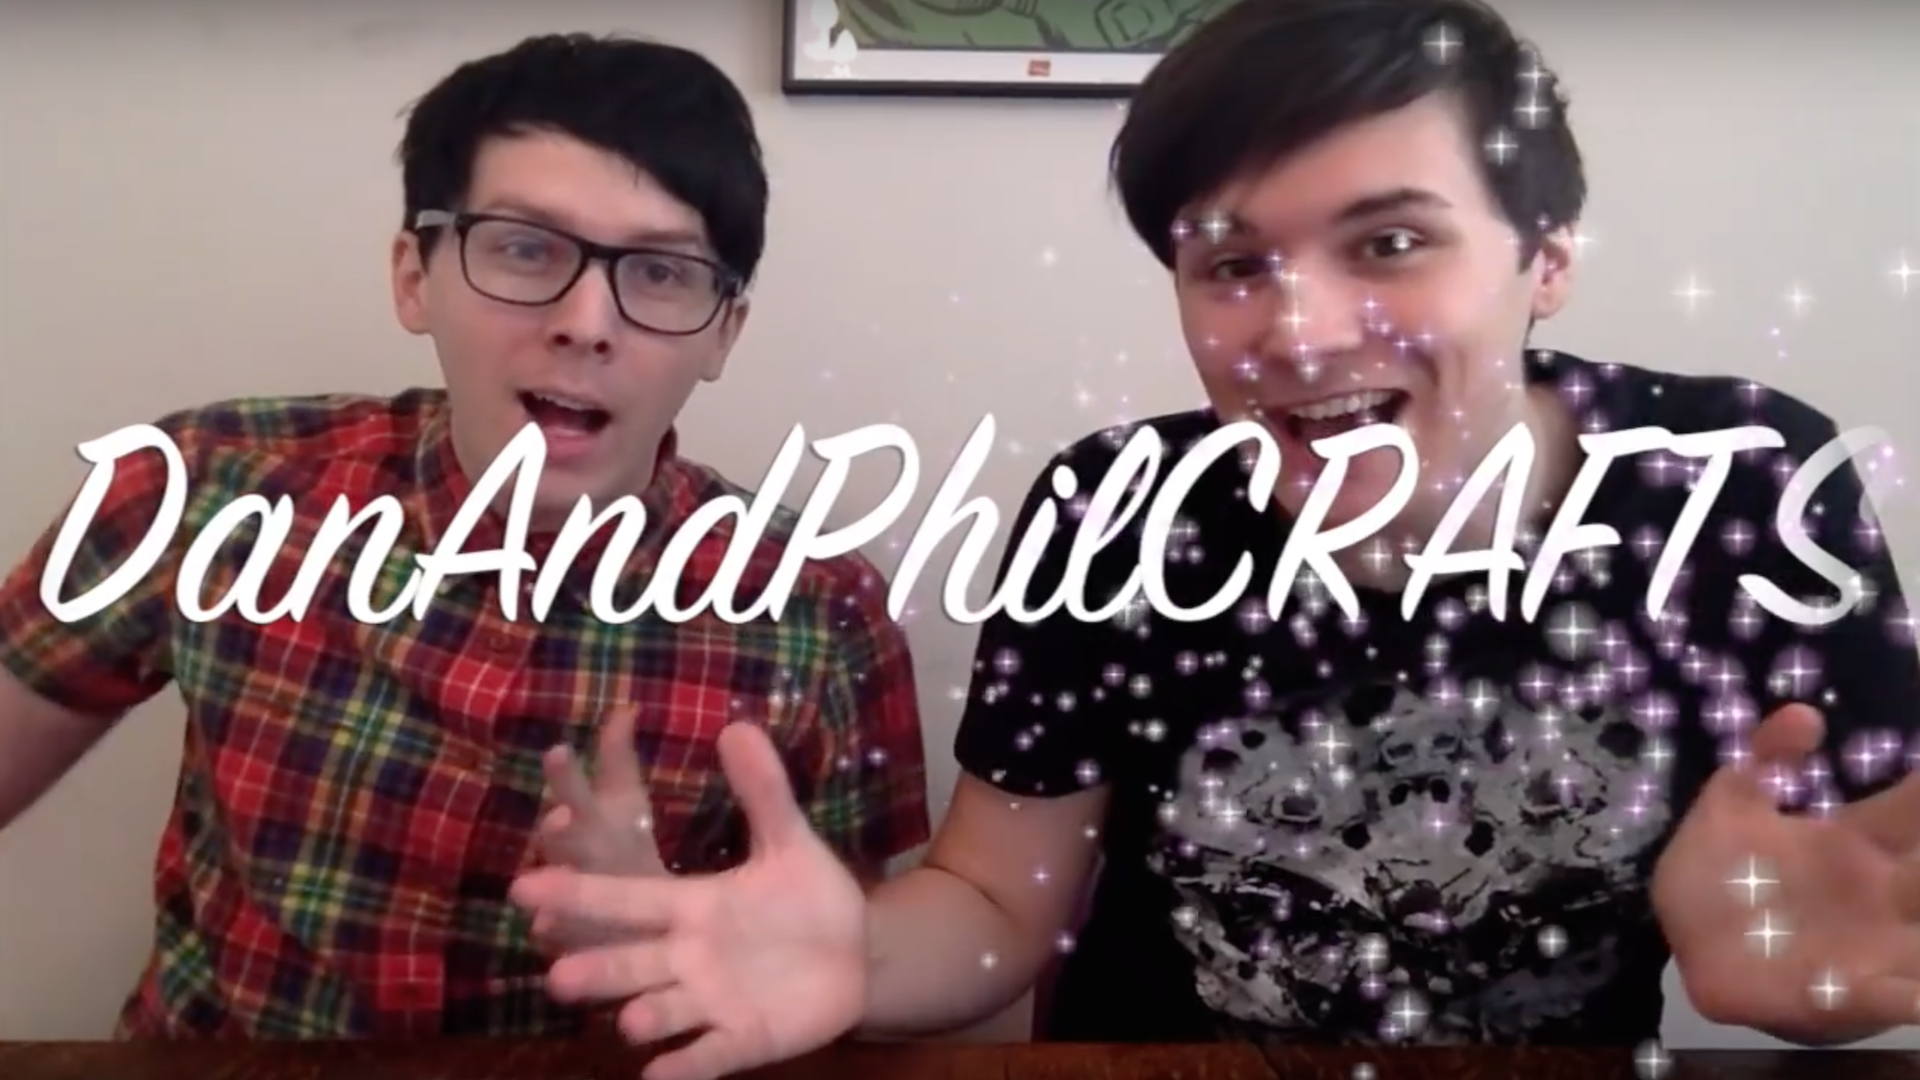 Dan and Phil make stuff on their crafts channel